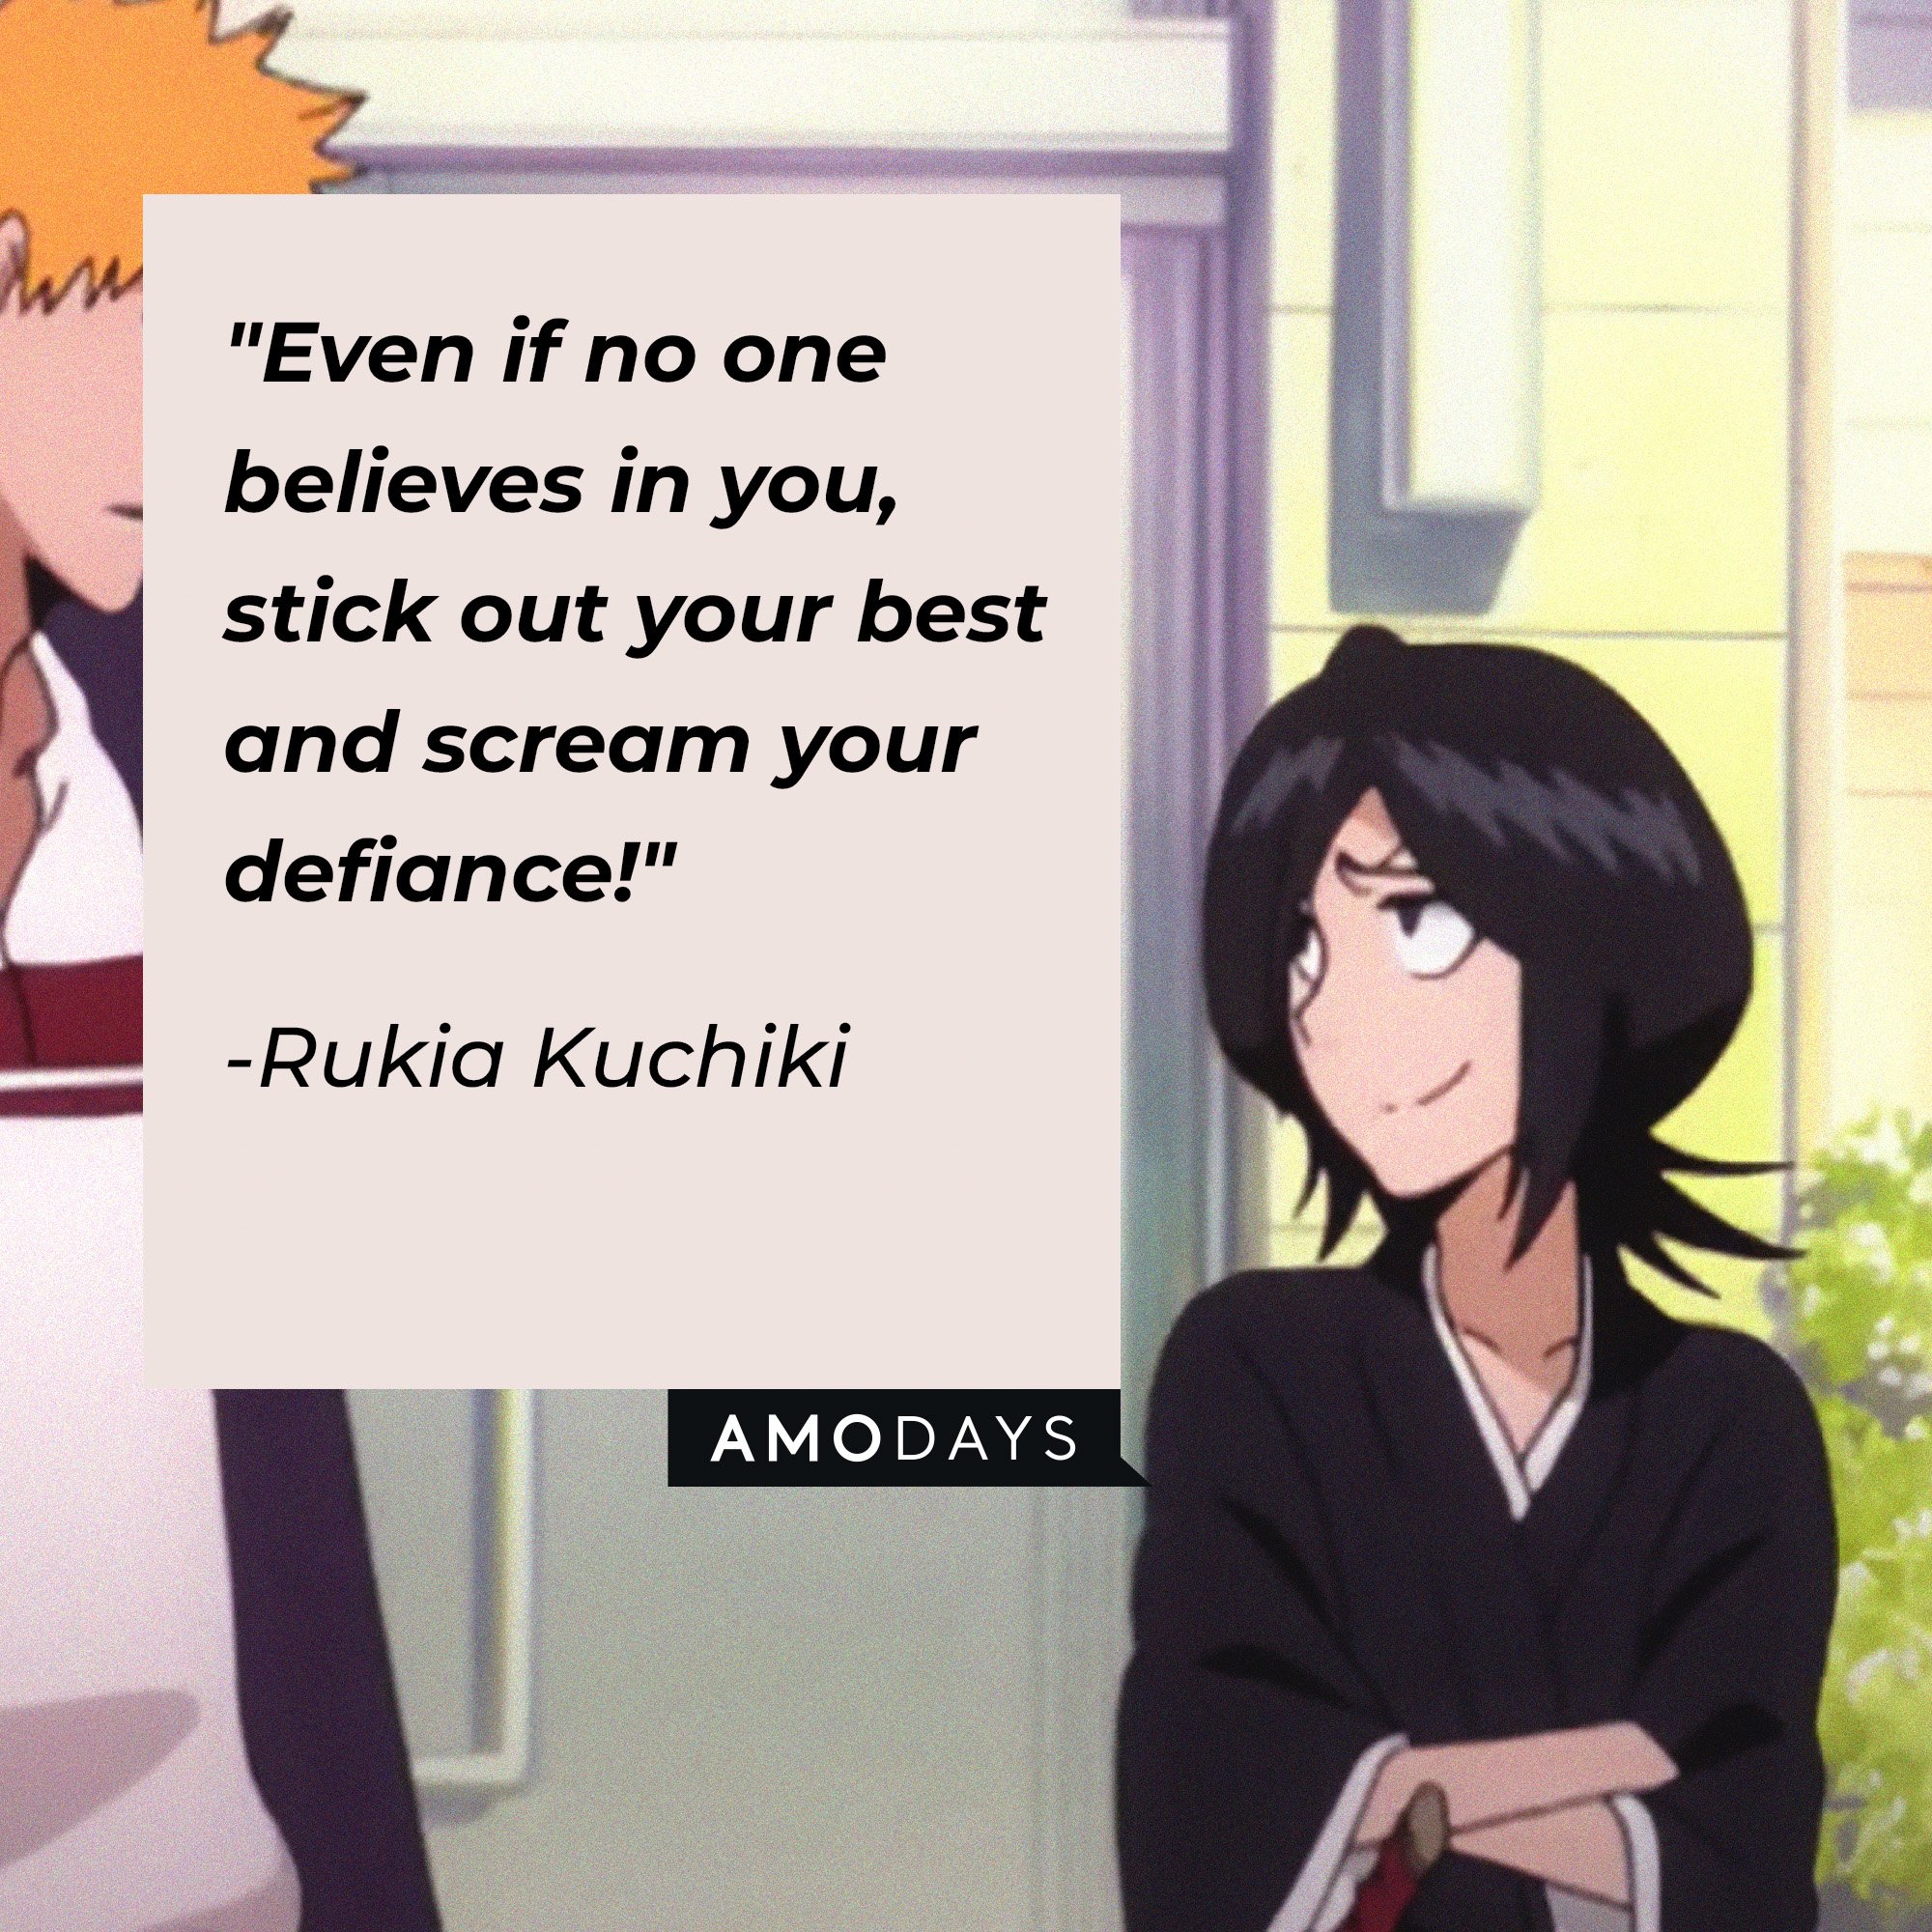 Rukia Kuchiki’s quote: "Even if no one believes in you, stick out your best and scream your defiance!" | Image: AmoDays